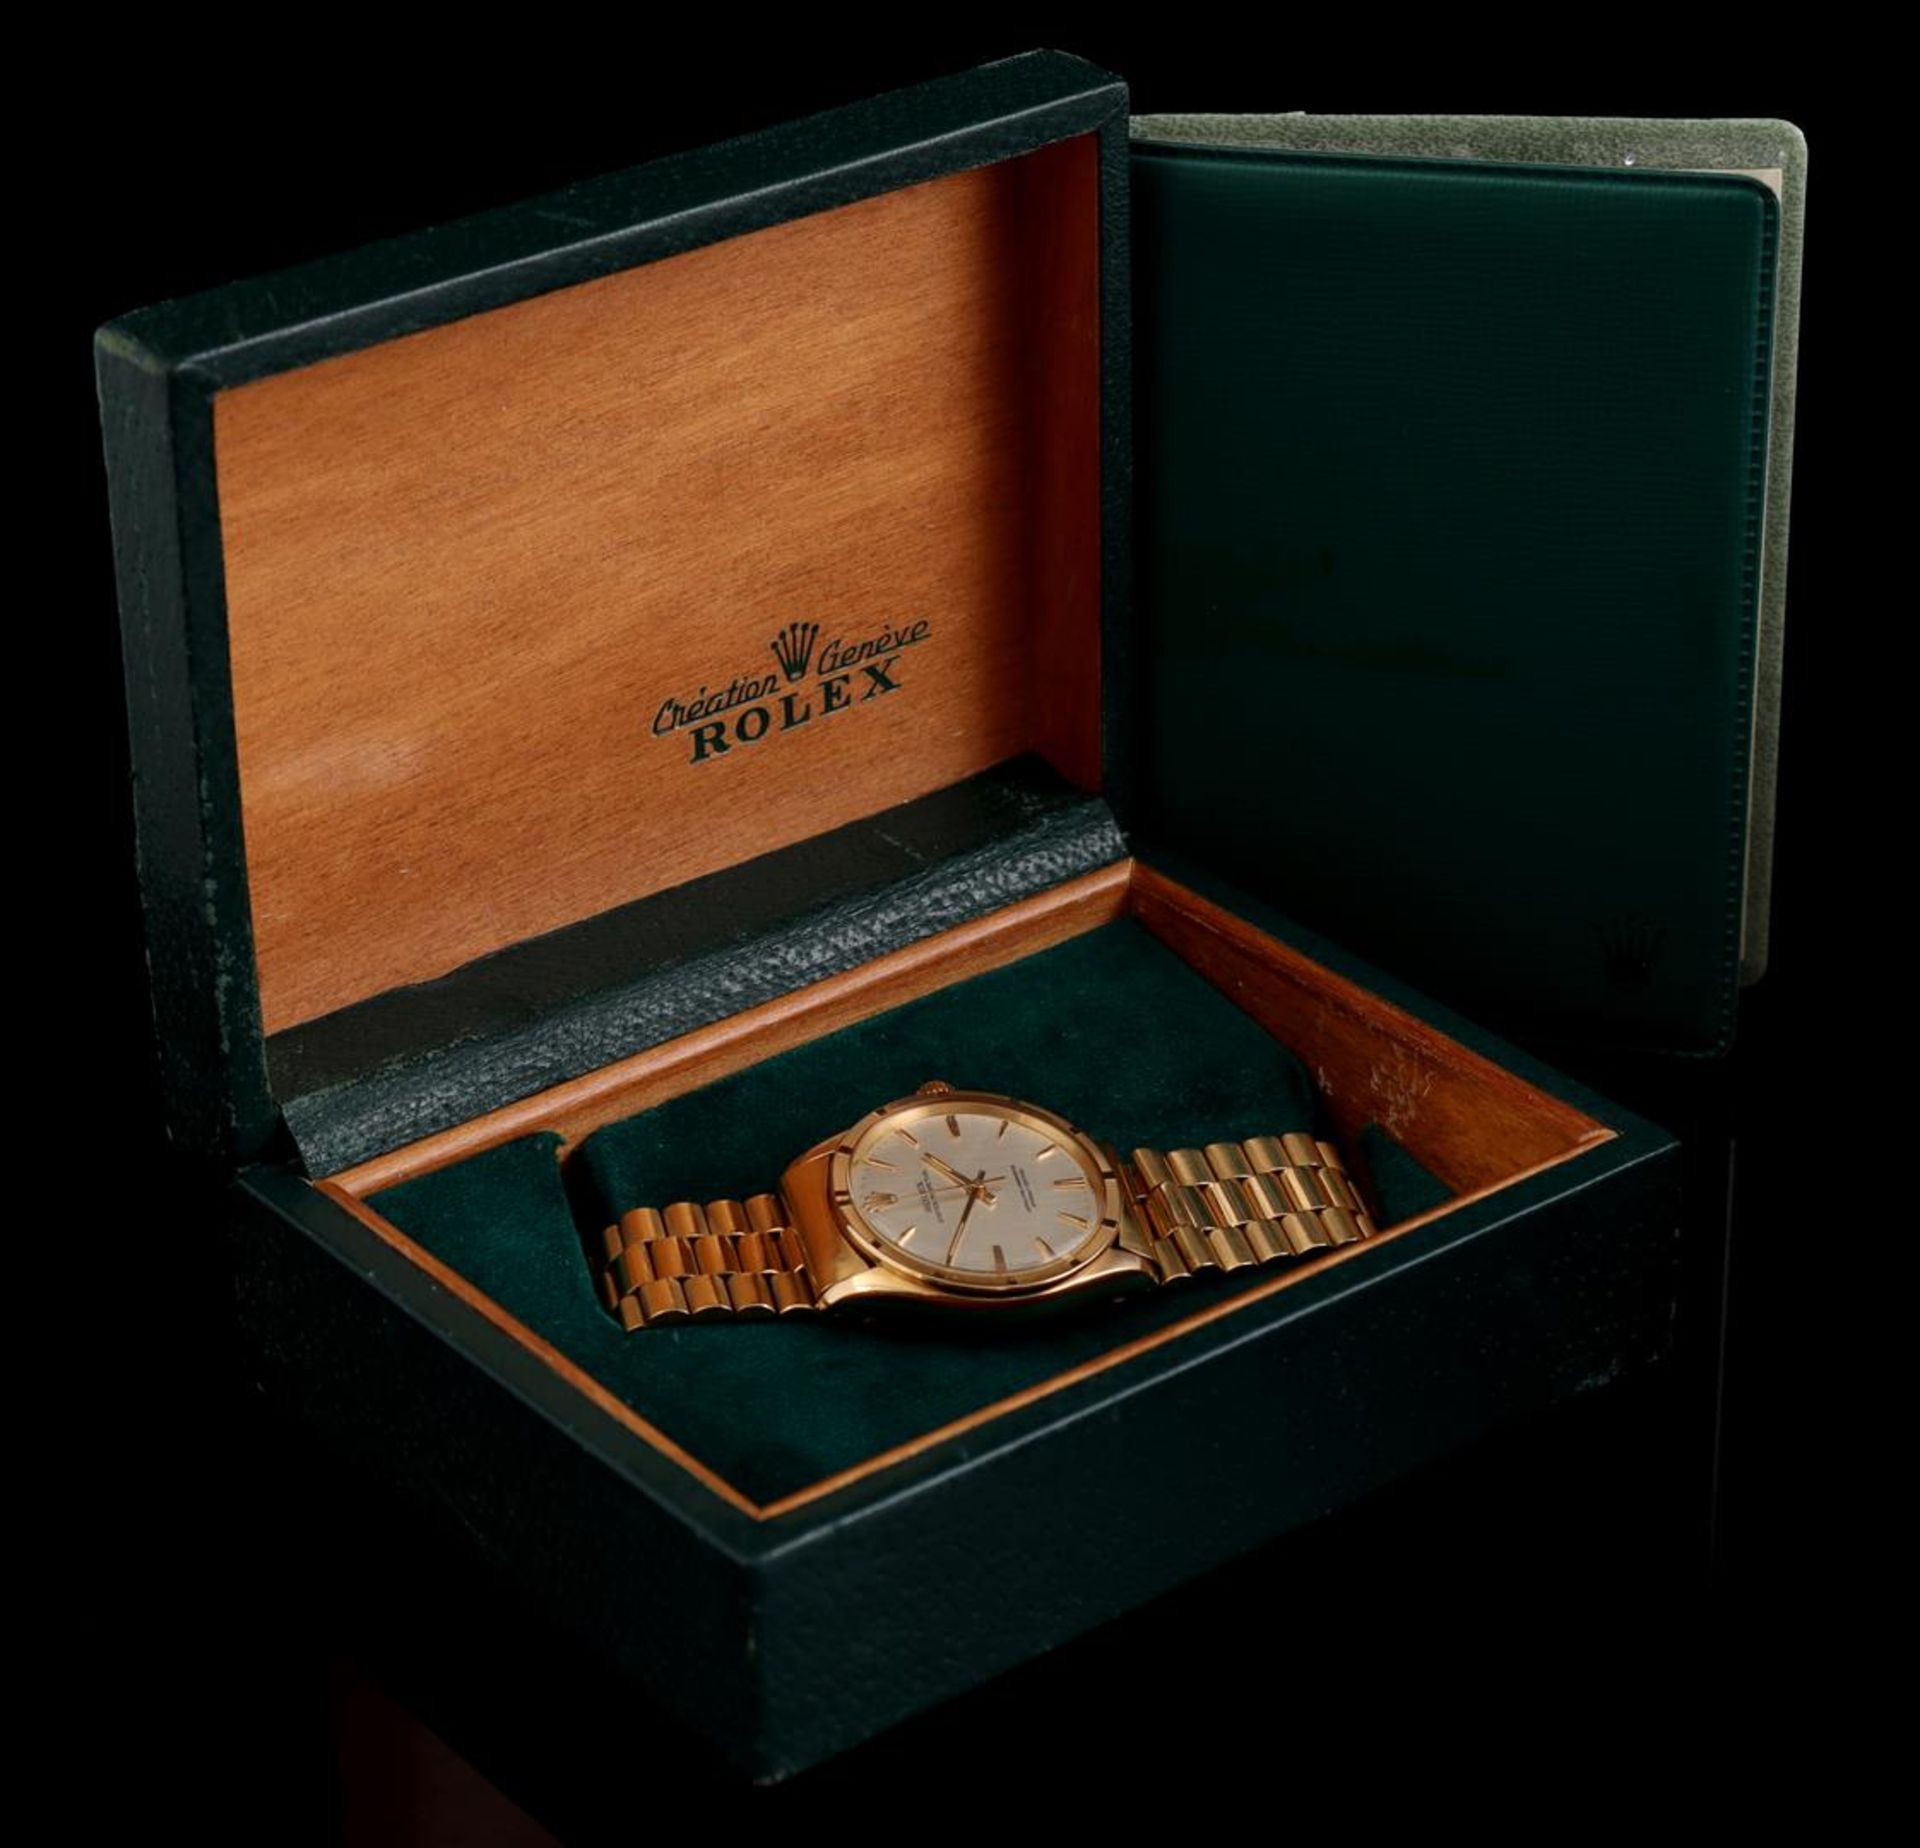 Rolex Oyster Perpetual wristwatch - Image 3 of 3